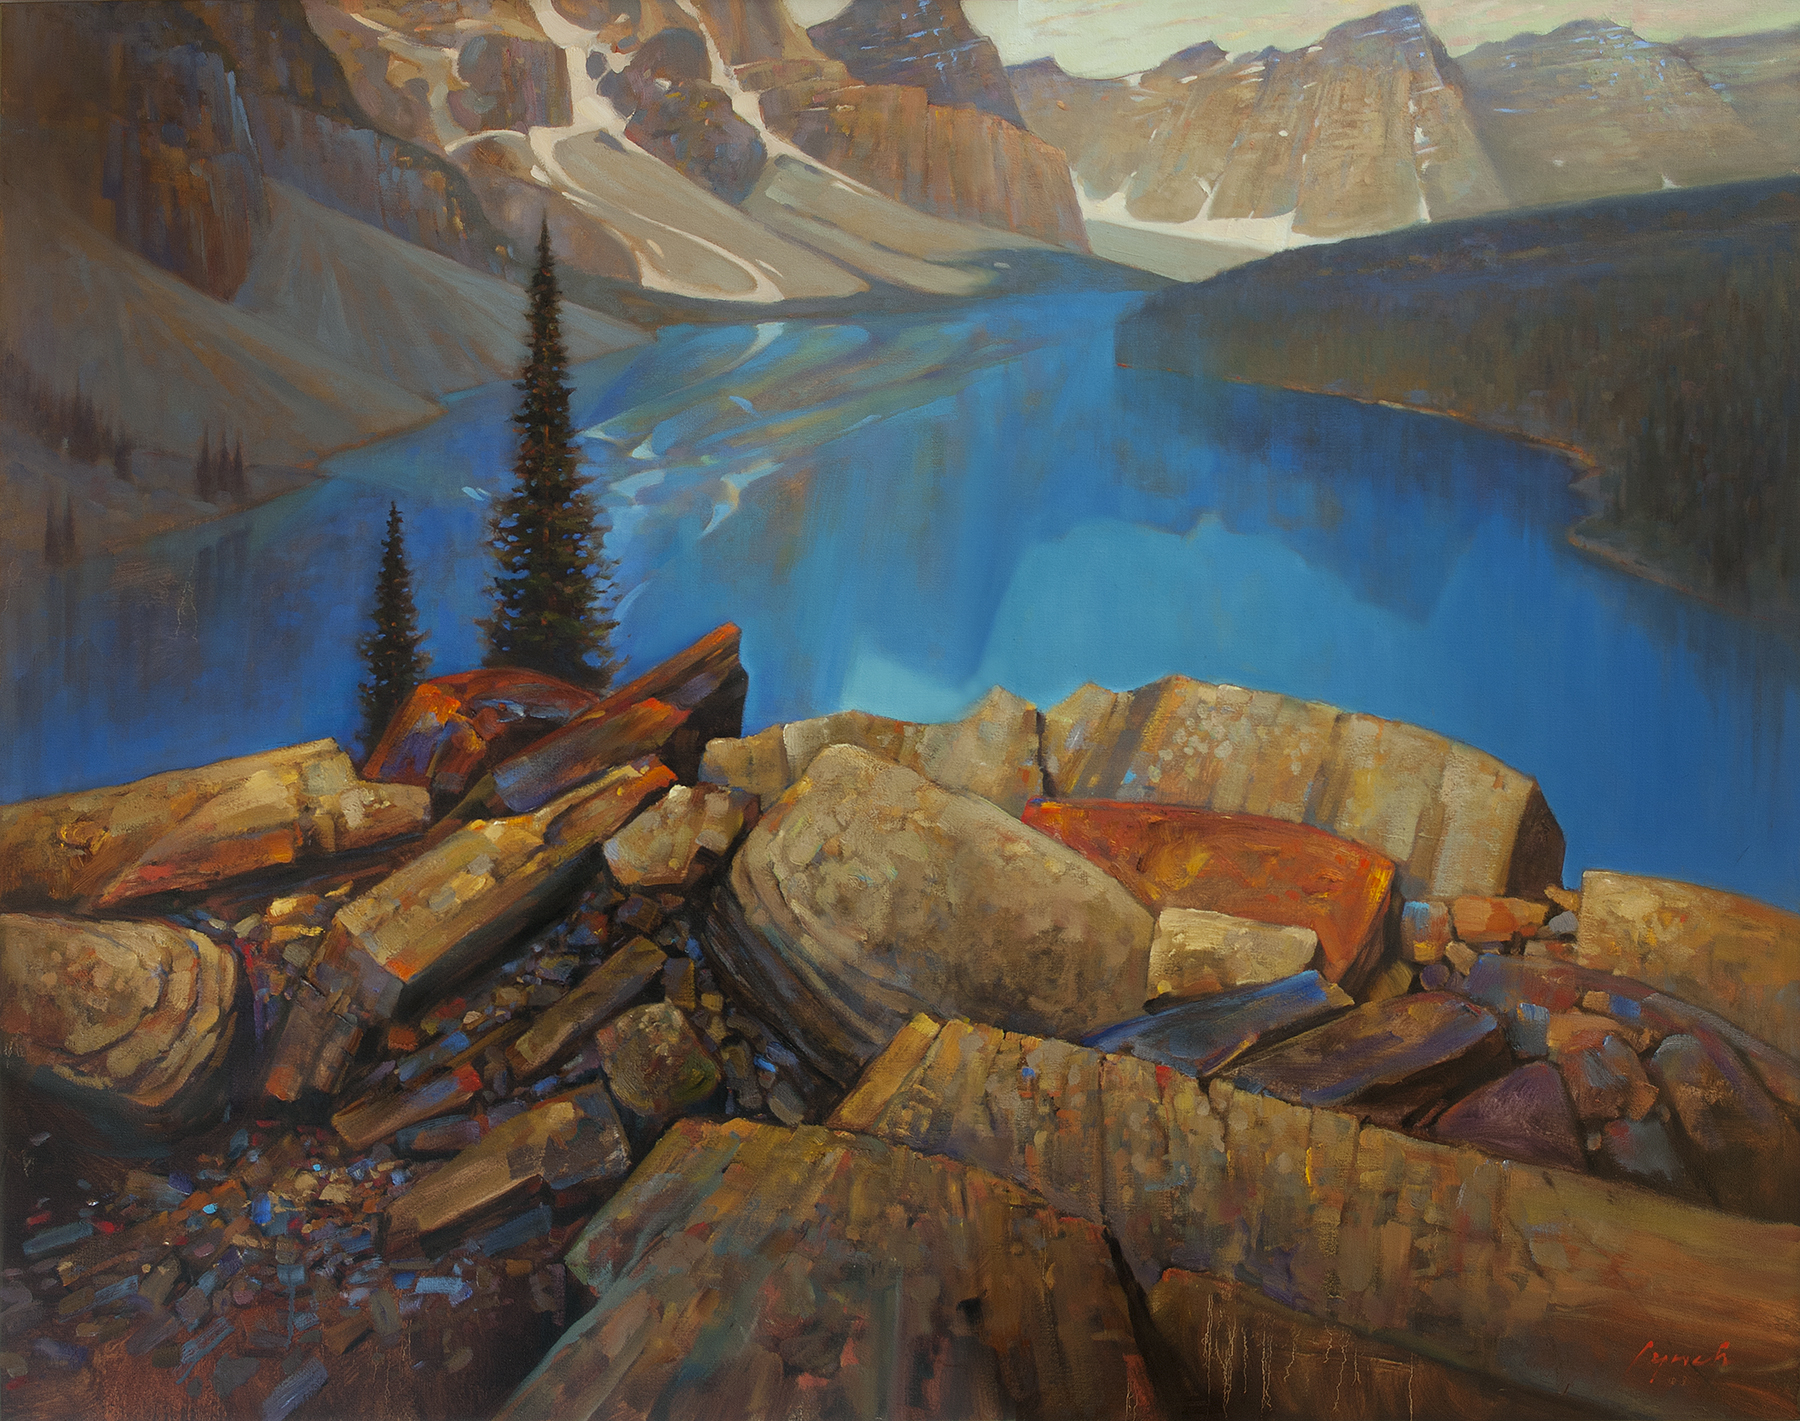 'Above Moraine' 4 X 5ft. oil on canvas, Mountain Galleries.